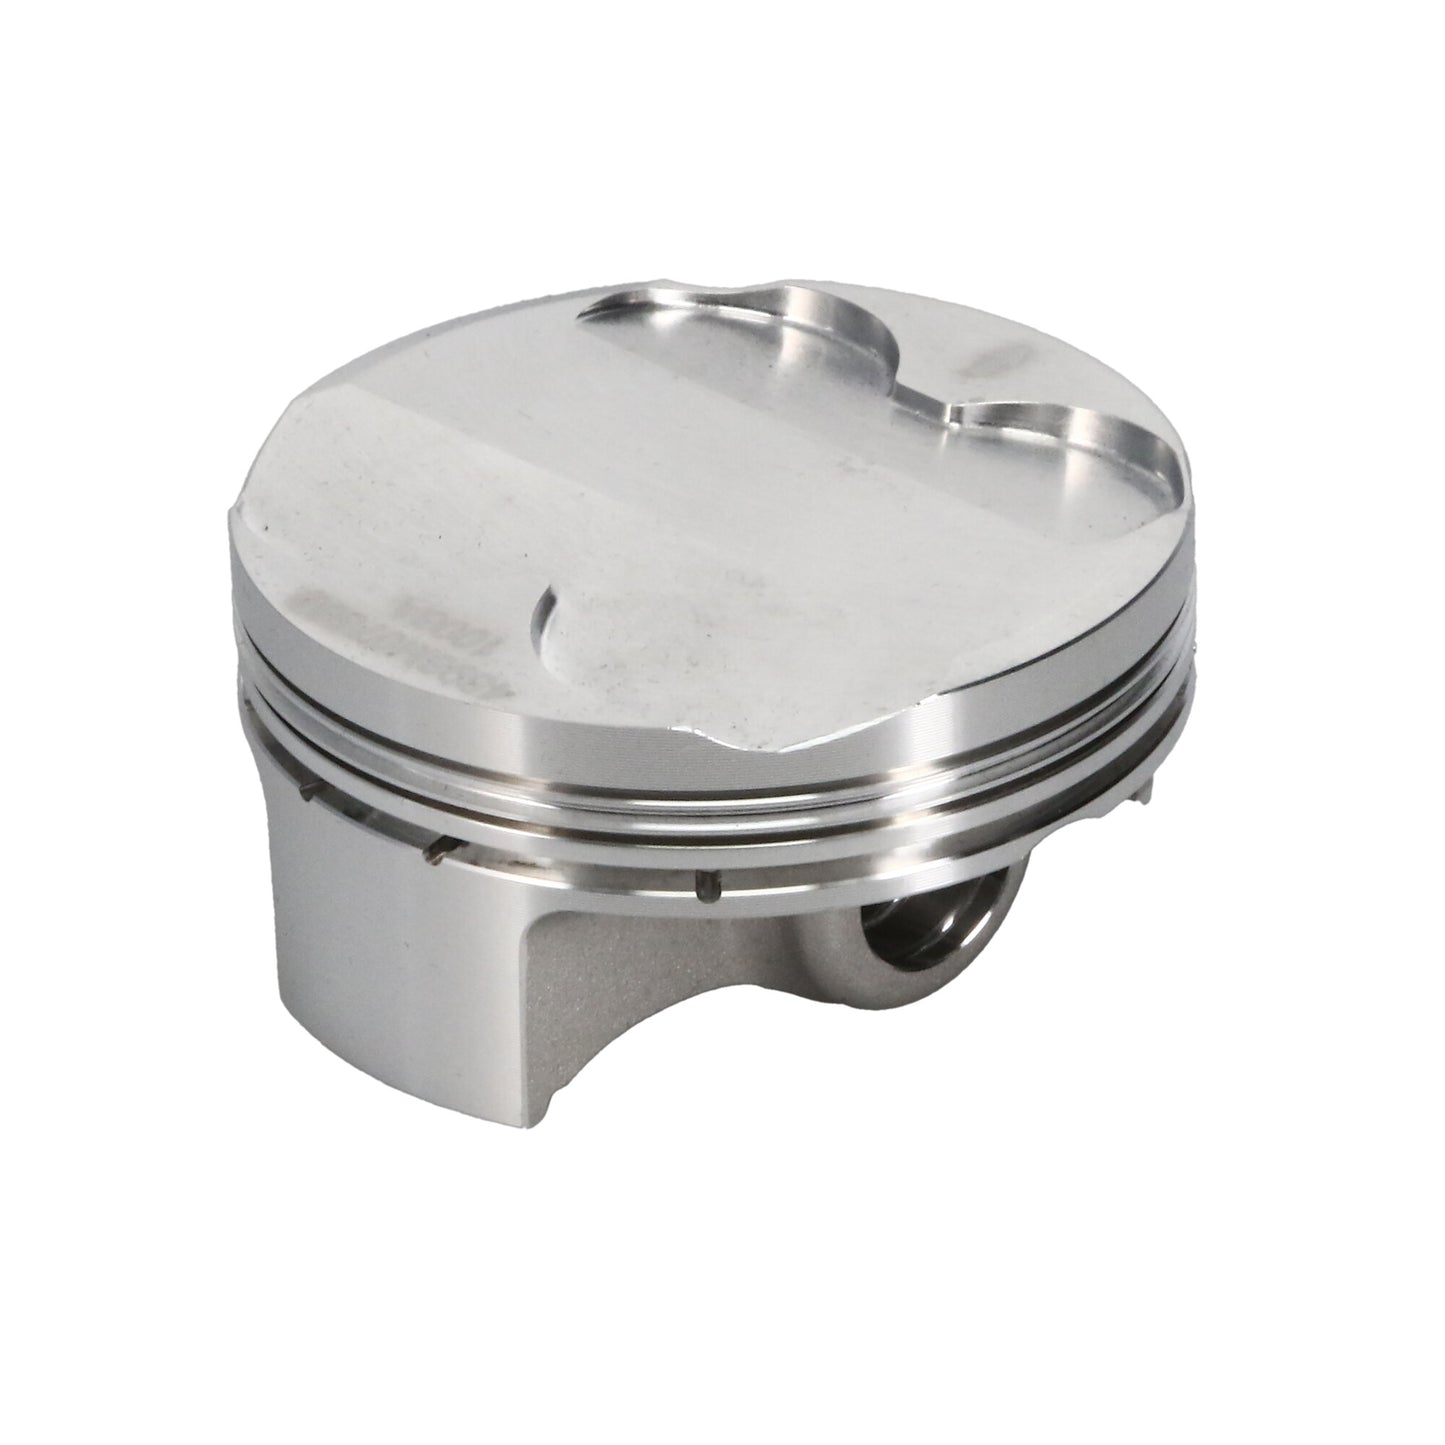 Wiseco 4 Stroke Forged Series Piston Kit 81.00 MM Bore 10.25:1 CR K1314